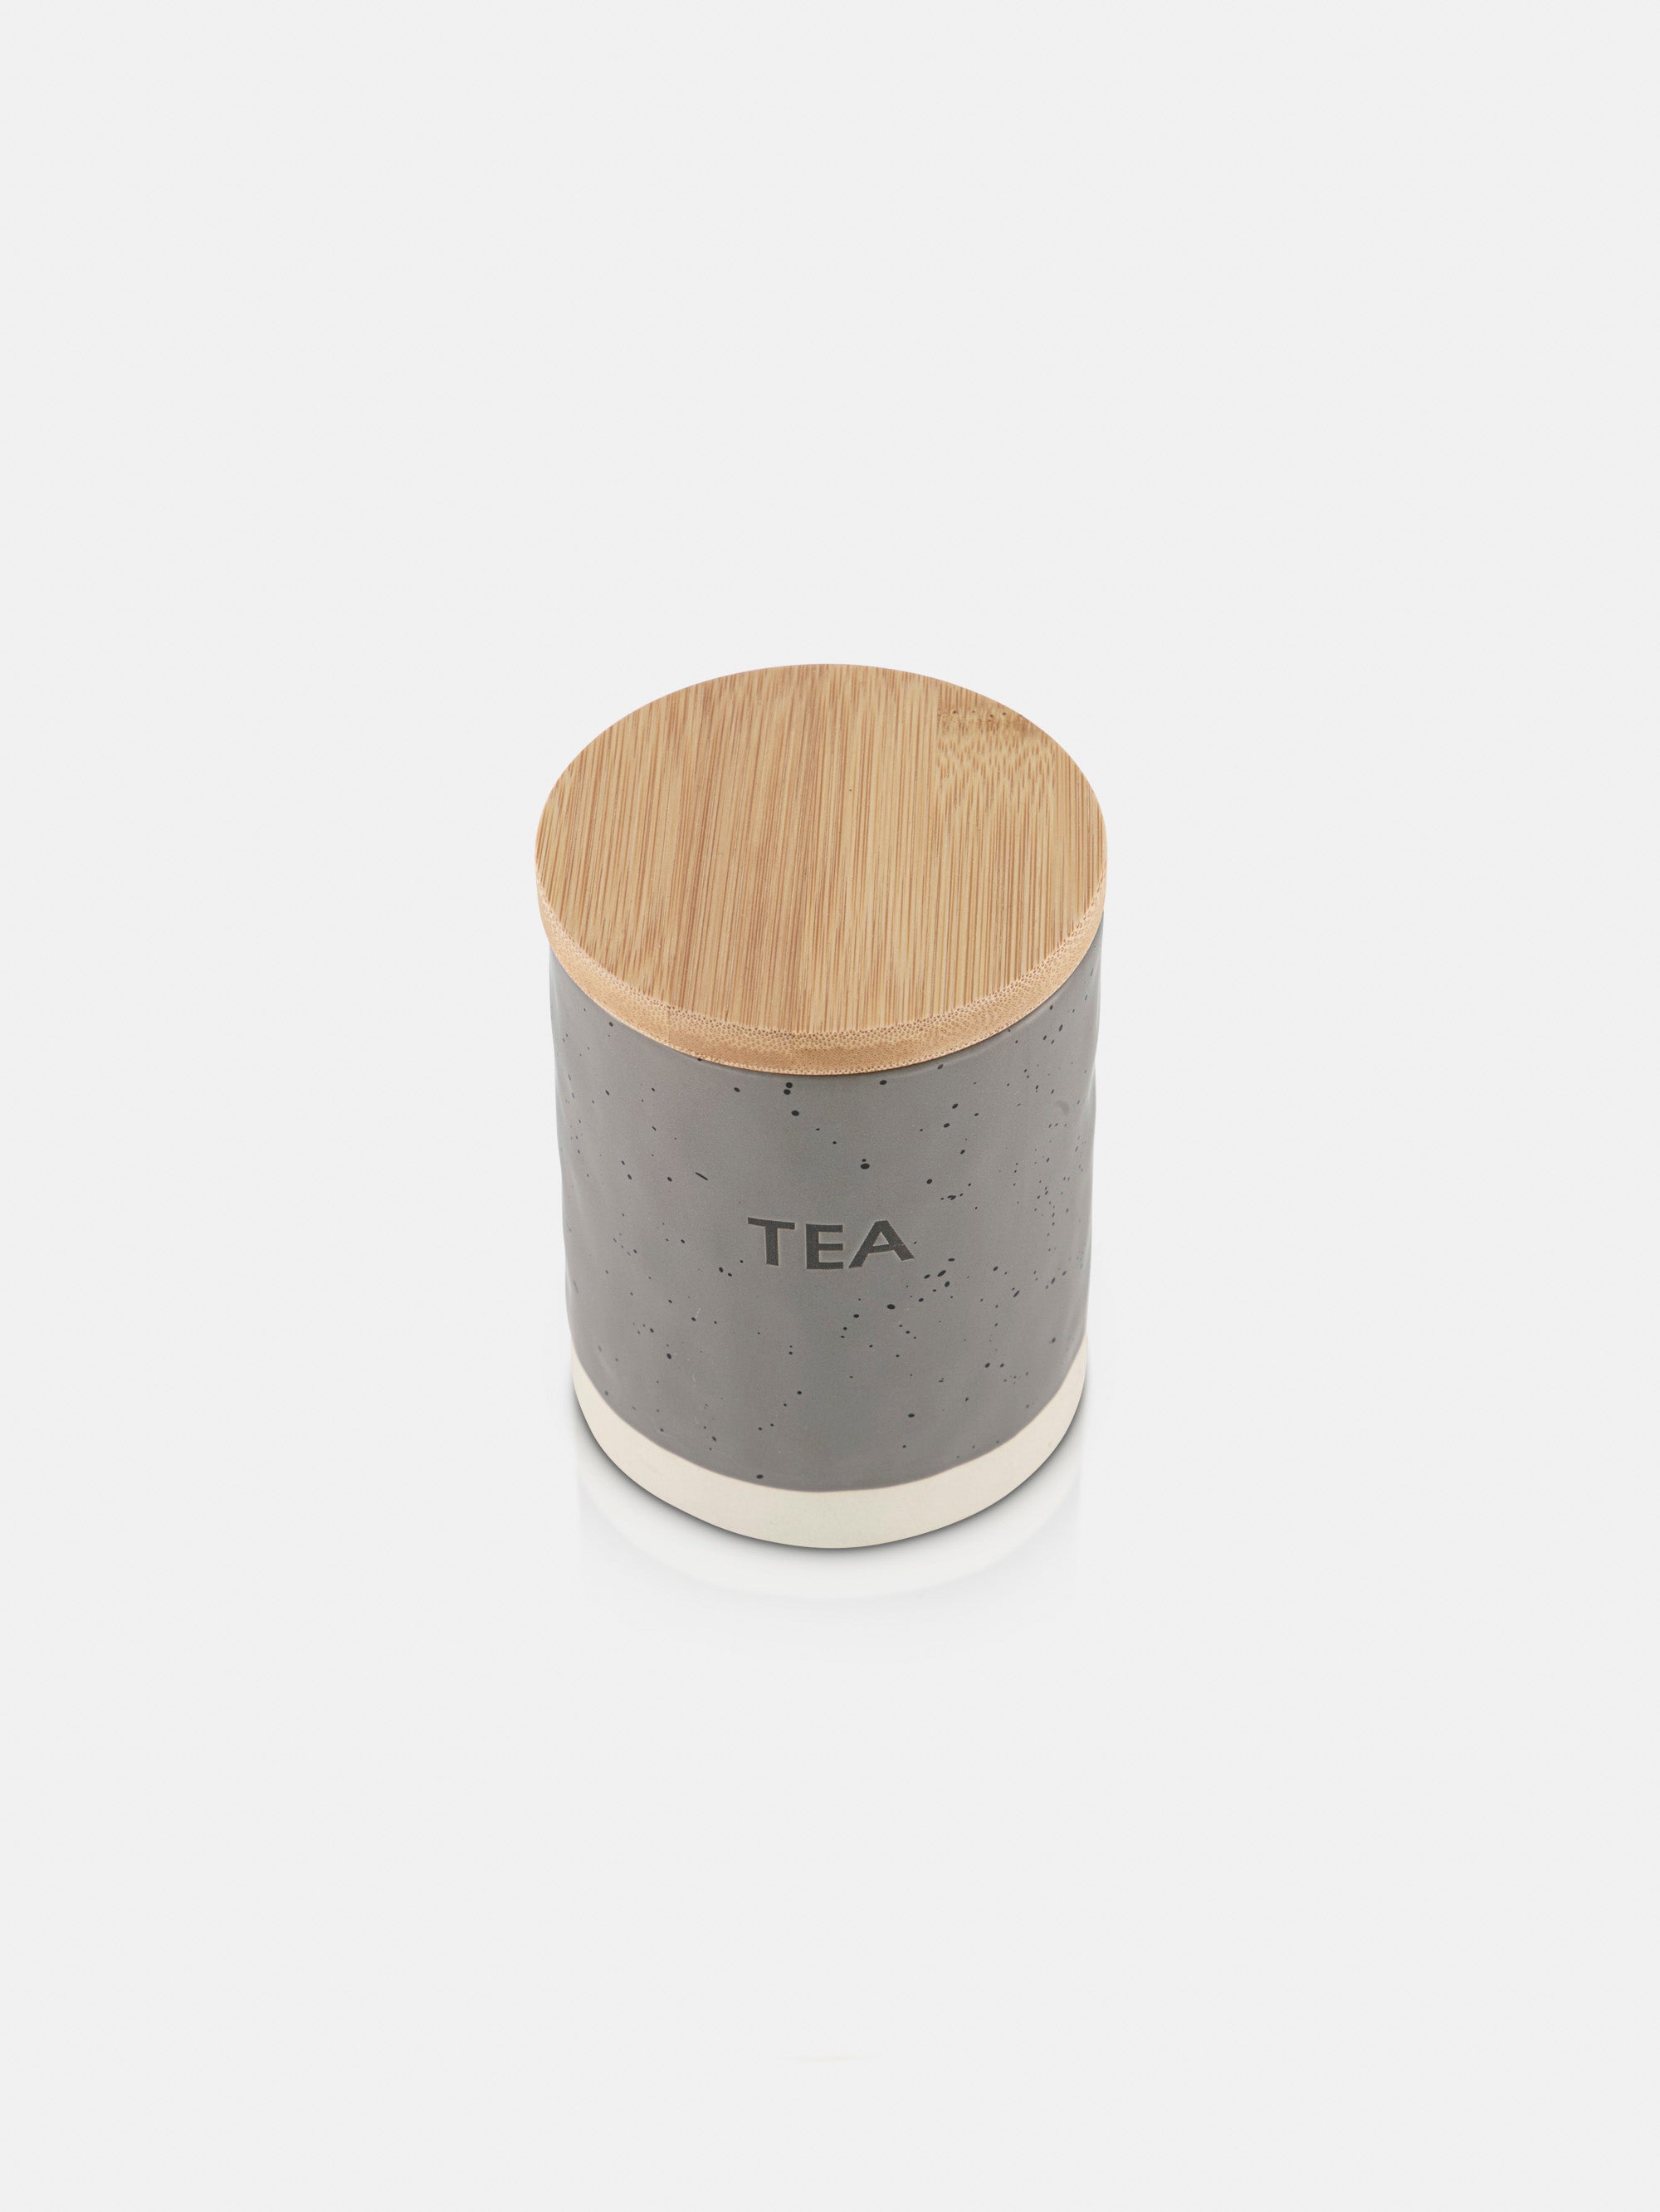 ROY Tea Storage Canister